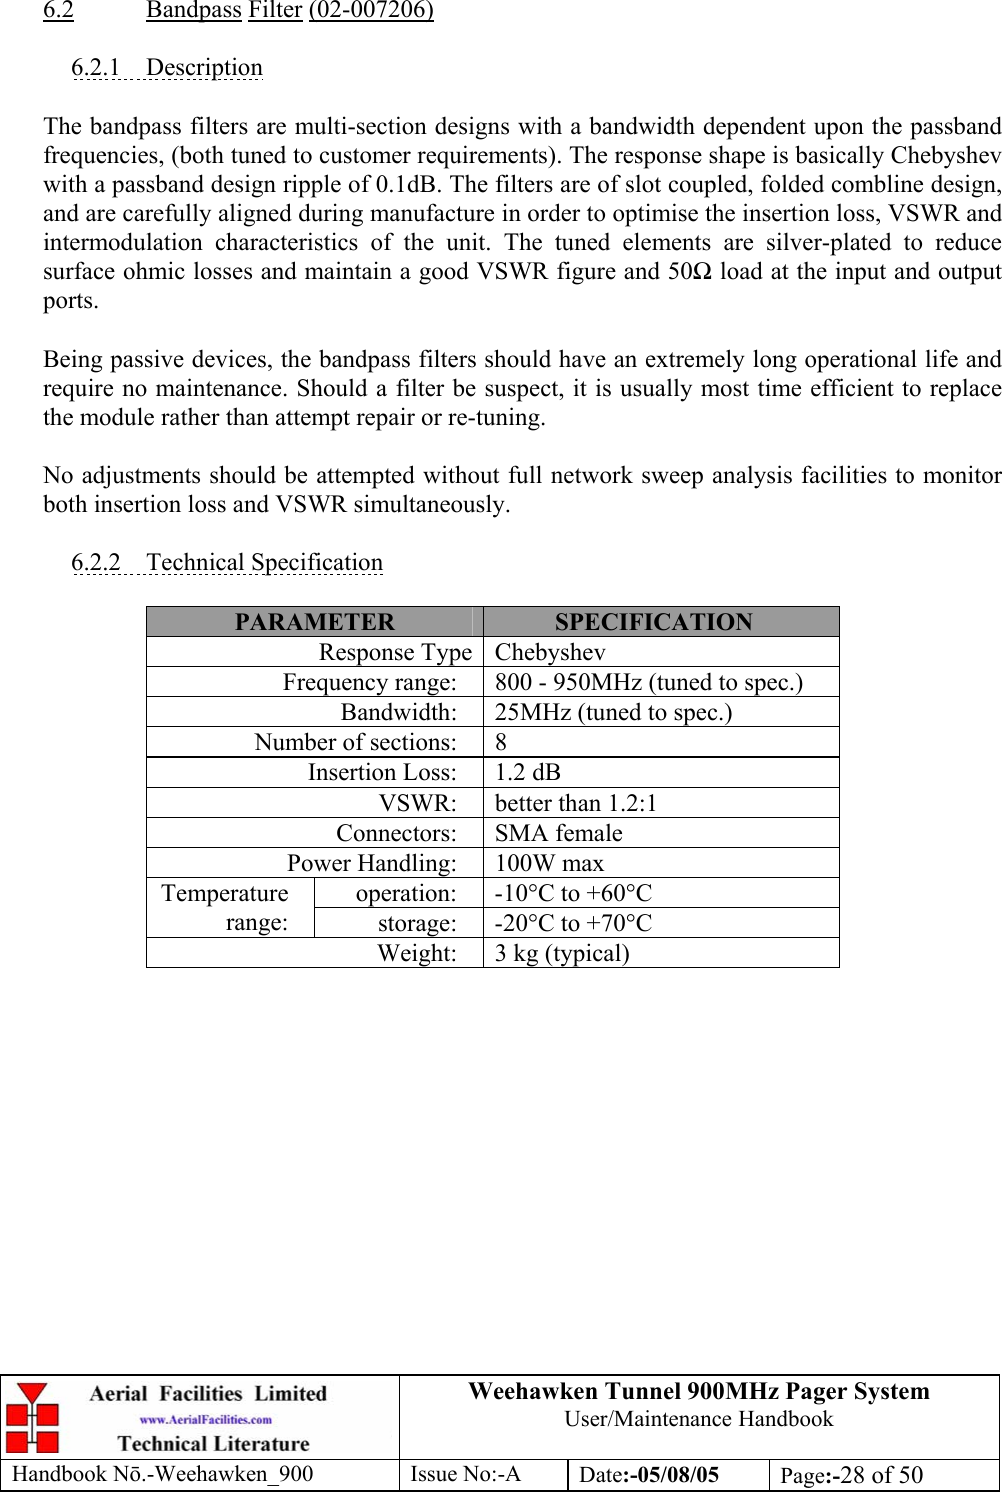 Weehawken Tunnel 900MHz Pager System User/Maintenance Handbook Handbook N.-Weehawken_900 Issue No:-A Date:-05/08/05  Page:-28 of 50   6.2 Bandpass Filter (02-007206)  6.2.1 Description  The bandpass filters are multi-section designs with a bandwidth dependent upon the passband frequencies, (both tuned to customer requirements). The response shape is basically Chebyshev with a passband design ripple of 0.1dB. The filters are of slot coupled, folded combline design, and are carefully aligned during manufacture in order to optimise the insertion loss, VSWR and intermodulation characteristics of the unit. The tuned elements are silver-plated to reduce surface ohmic losses and maintain a good VSWR figure and 50 load at the input and output ports.  Being passive devices, the bandpass filters should have an extremely long operational life and require no maintenance. Should a filter be suspect, it is usually most time efficient to replace the module rather than attempt repair or re-tuning.  No adjustments should be attempted without full network sweep analysis facilities to monitor both insertion loss and VSWR simultaneously.  6.2.2 Technical Specification  PARAMETER  SPECIFICATION Response Type Chebyshev Frequency range:  800 - 950MHz (tuned to spec.) Bandwidth:  25MHz (tuned to spec.) Number of sections:  8 Insertion Loss:  1.2 dB VSWR:  better than 1.2:1 Connectors: SMA female Power Handling:  100W max operation:  -10°C to +60°C Temperature range:  storage:  -20°C to +70°C Weight:  3 kg (typical)  